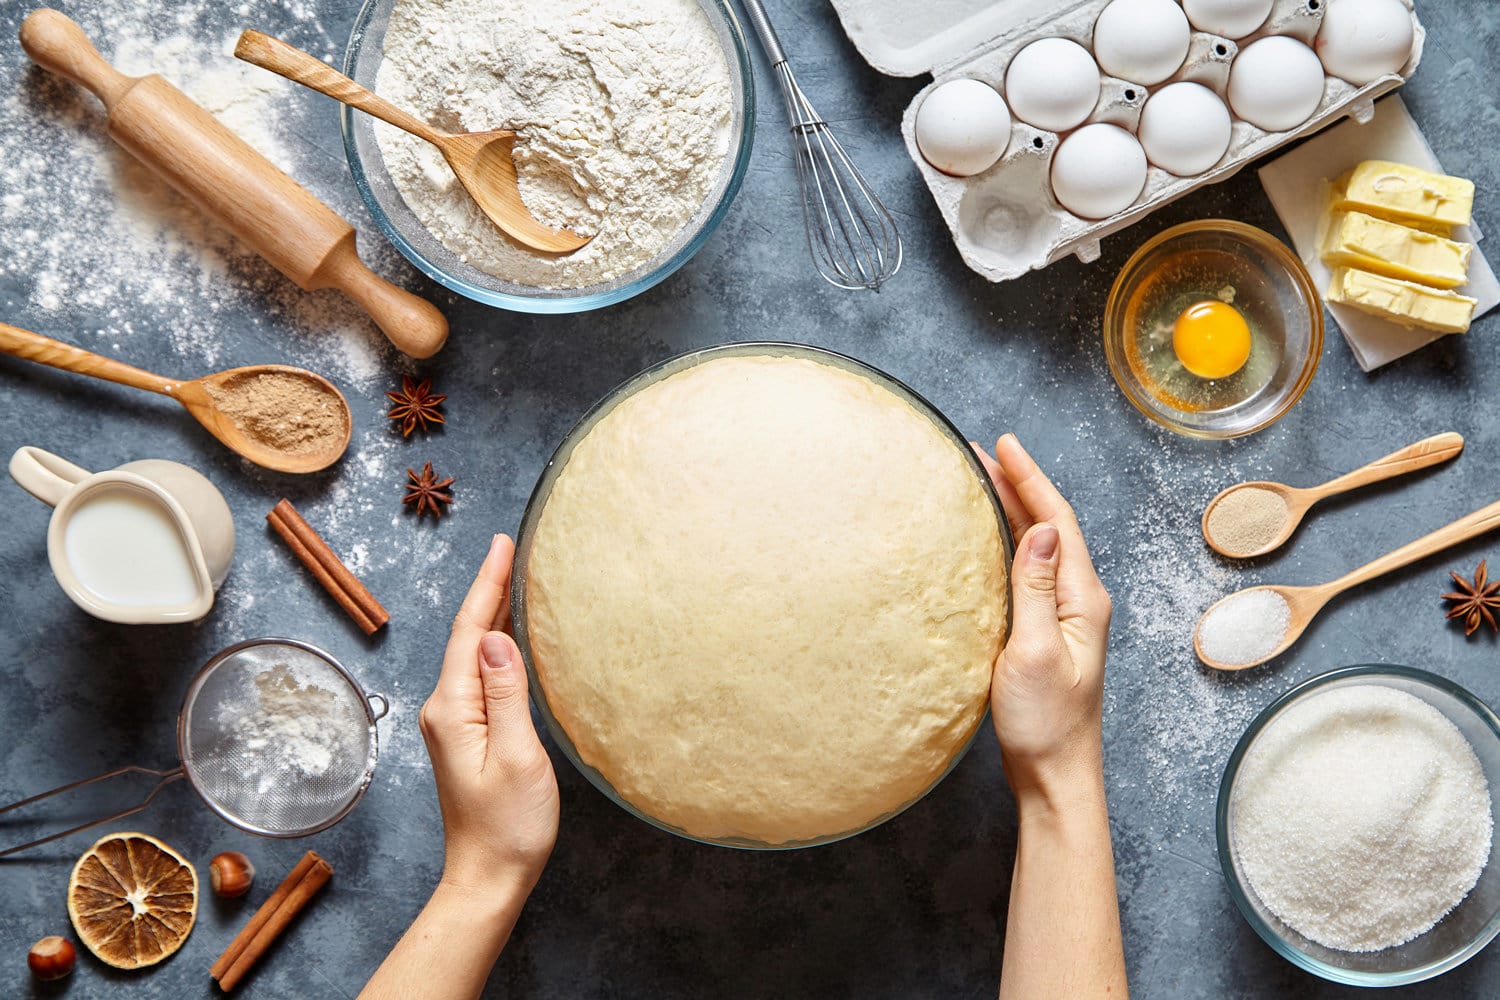 Hands working with dough preparation recipe bread, pizza or pie making ingridients, food flat lay on kitchen table background. Butter, milk, yeast, flour, eggs, sugar pastry or bakery cooking. 